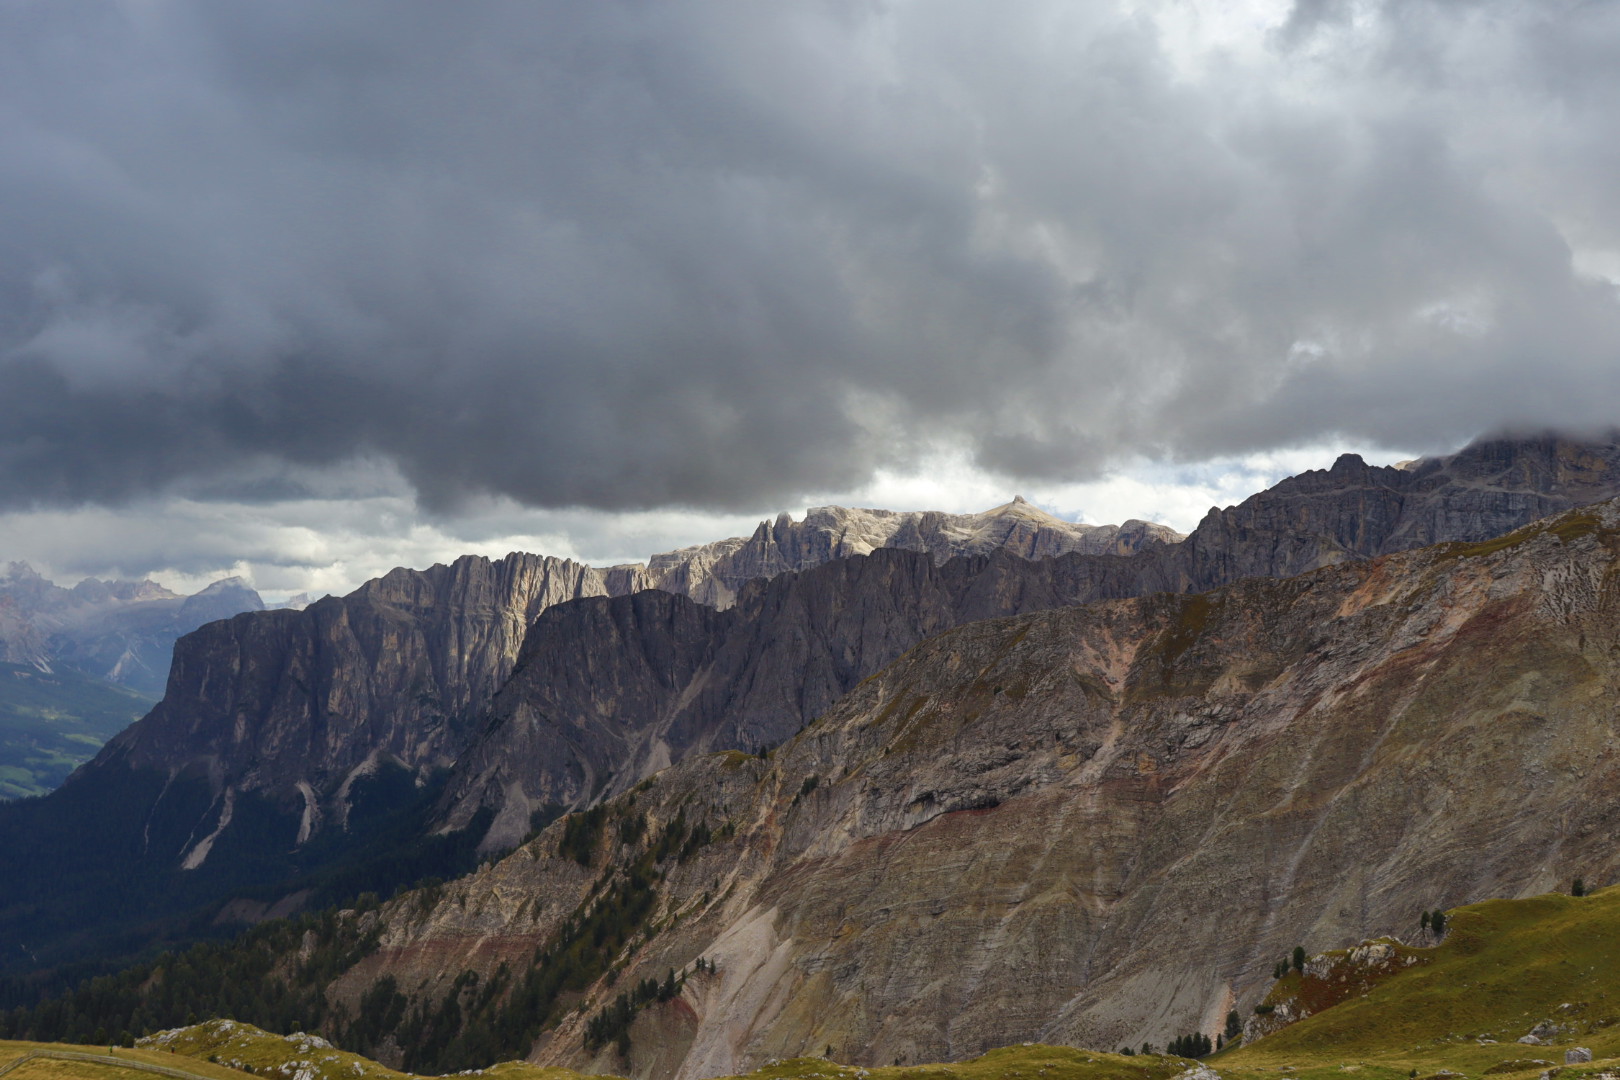 A magnificent view to the Dolomites, seen from near the Schlüter chalet (15:10 pm)